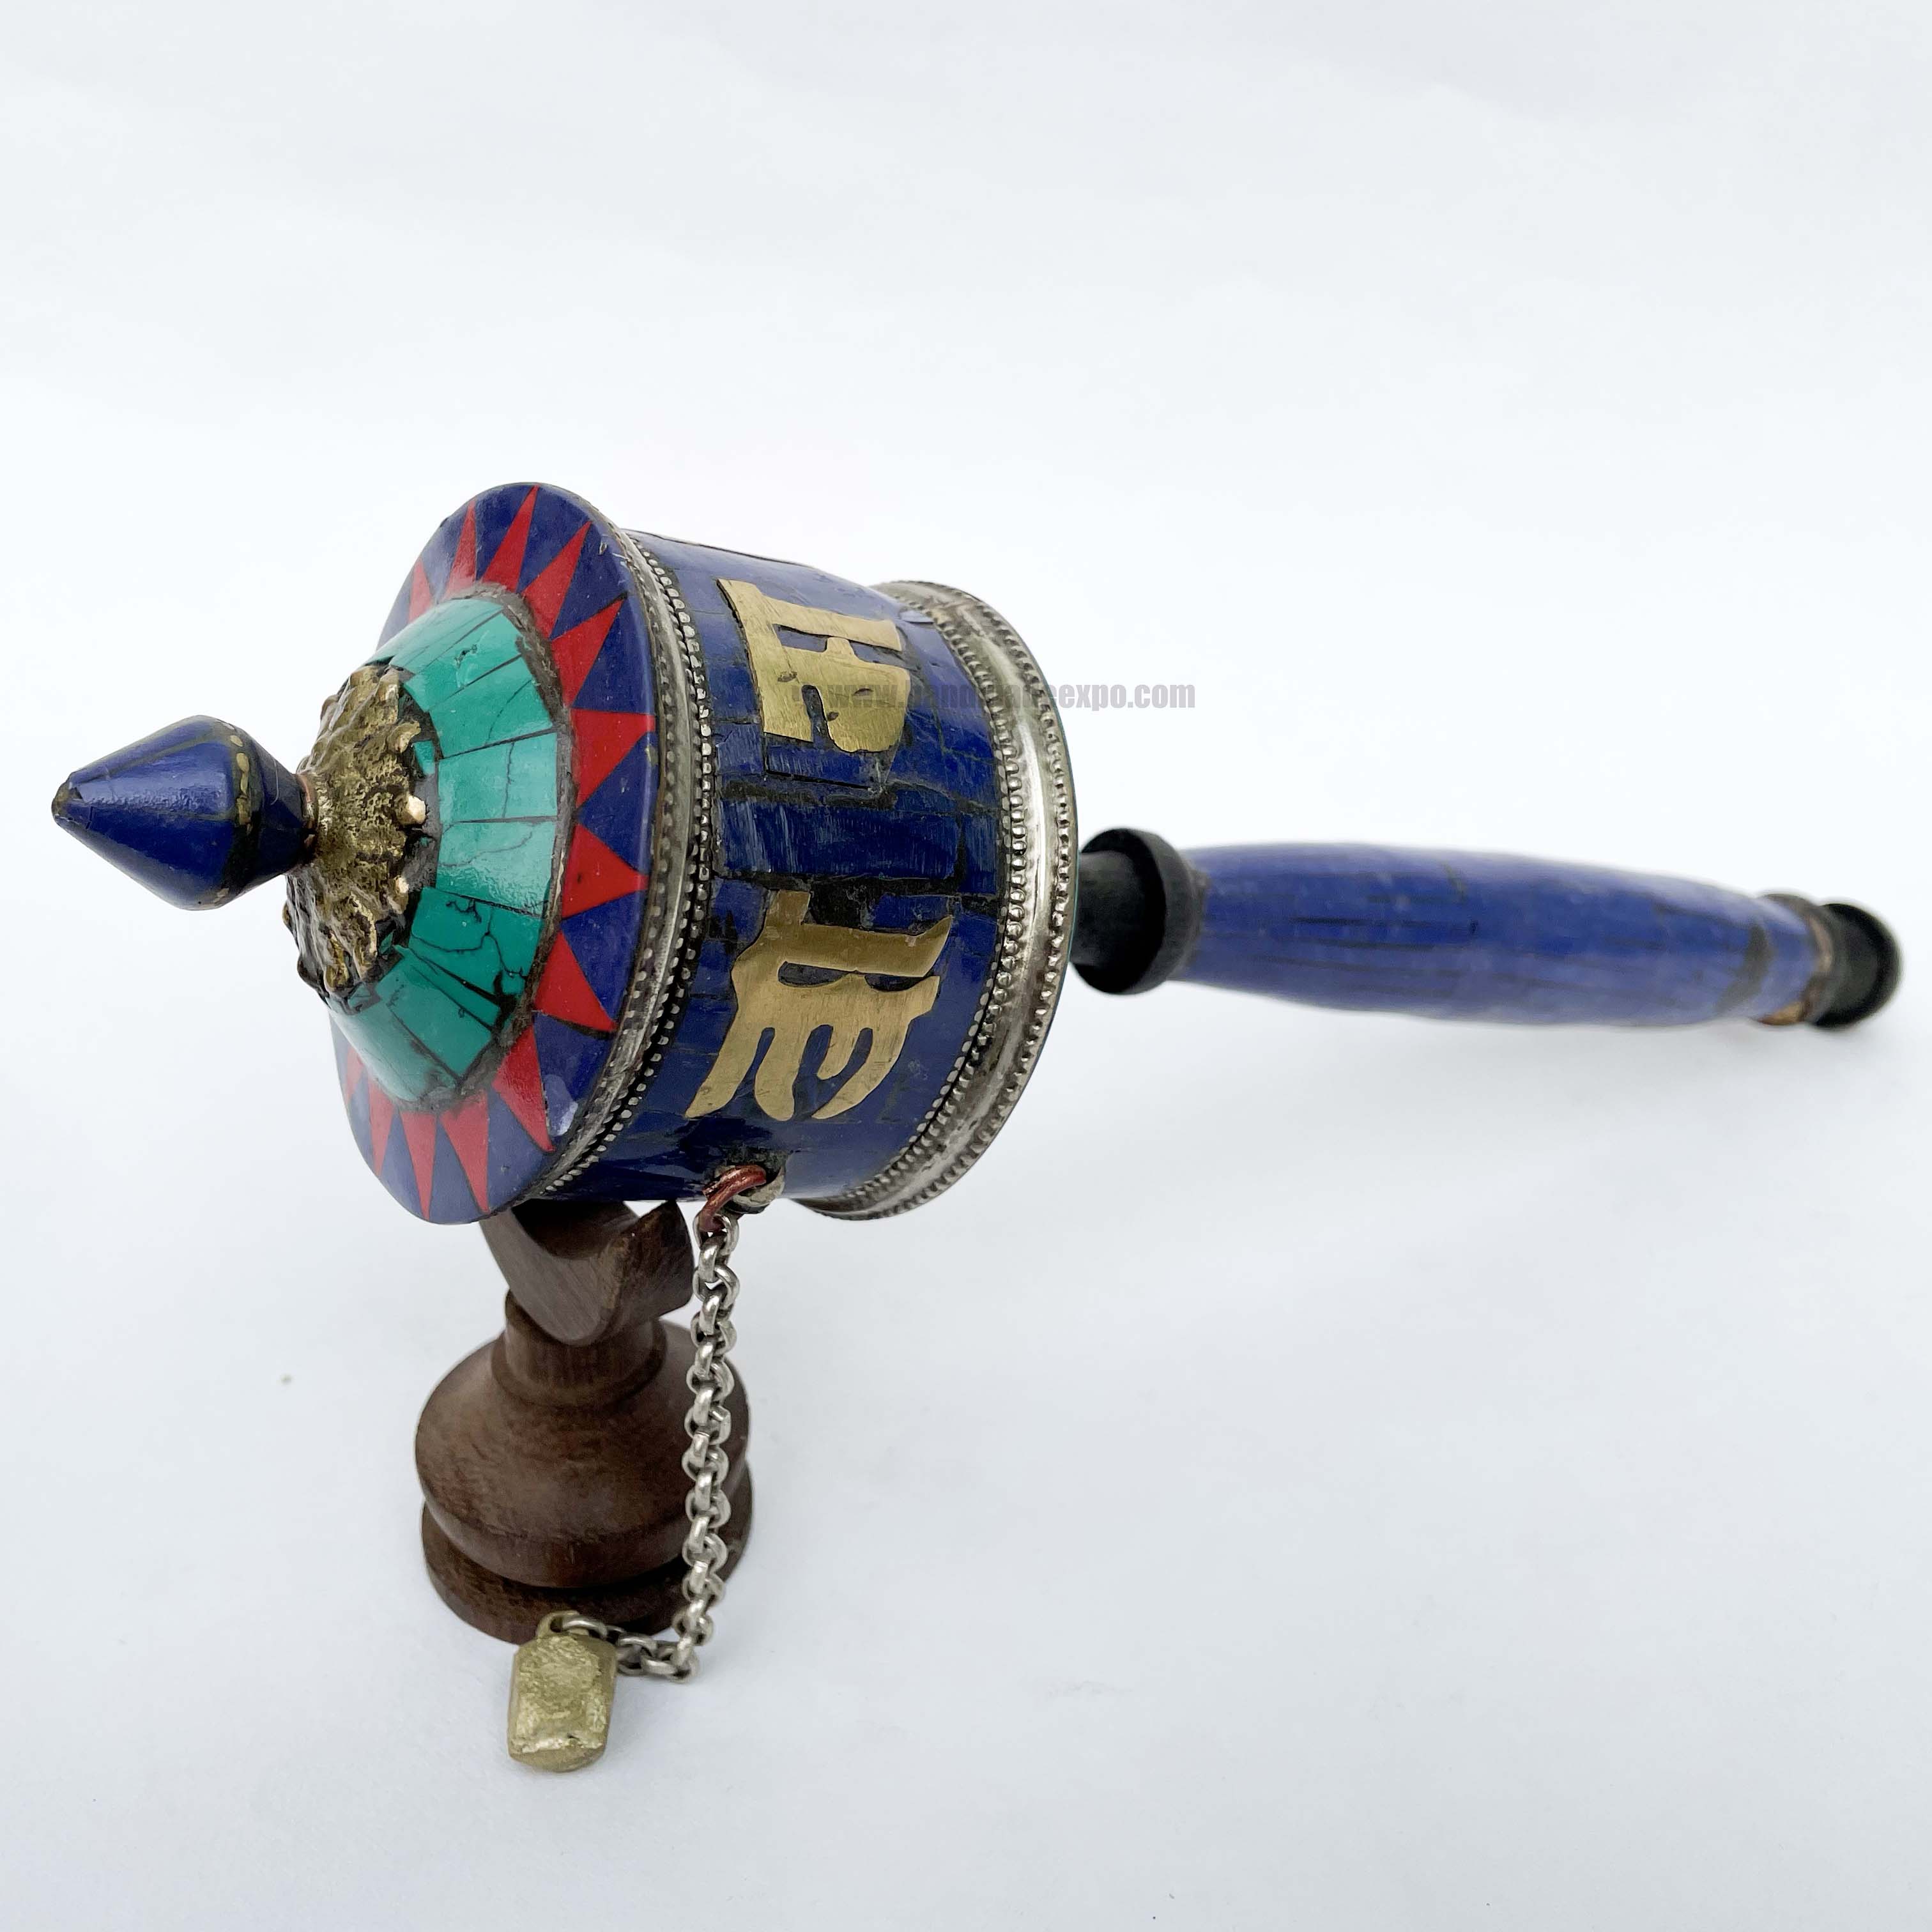 Brass Hand Held With Mantra Prayer Wheel, blue Color